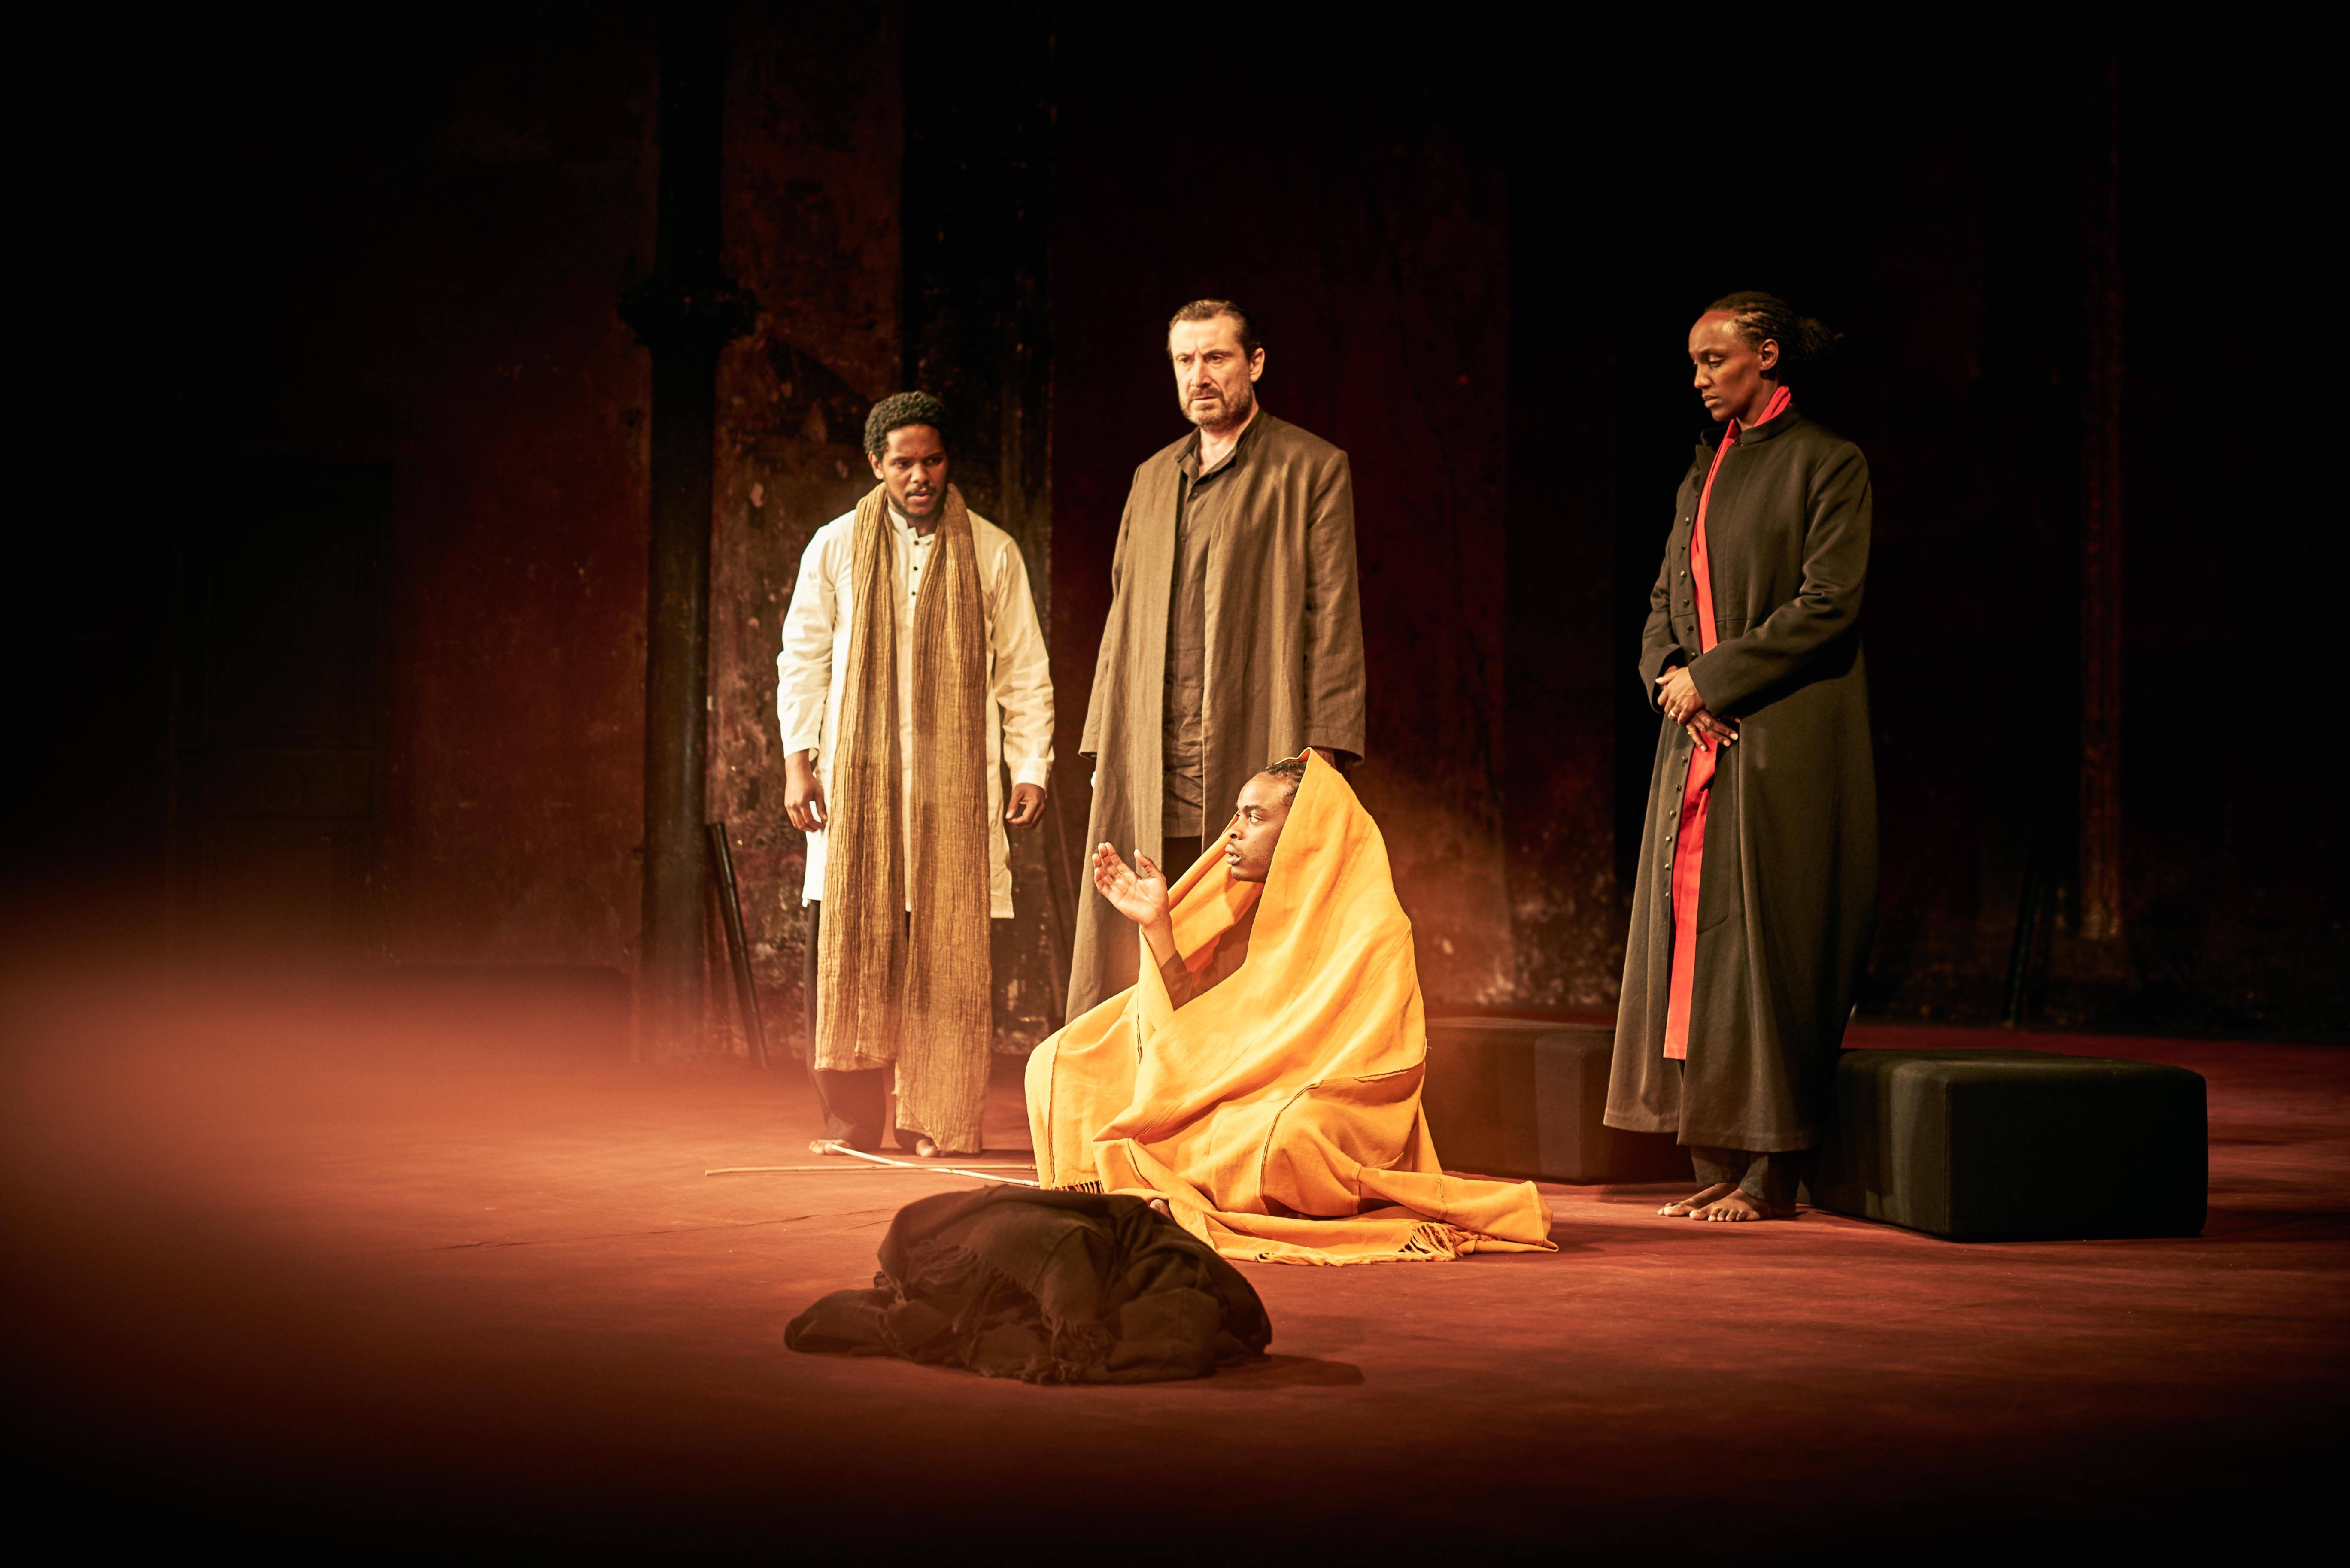 Three men in long coats stand spotlit on a dark stage, looking on as a person, seated on the floor and wrapped in a yellow blanket, gestures with one hand.